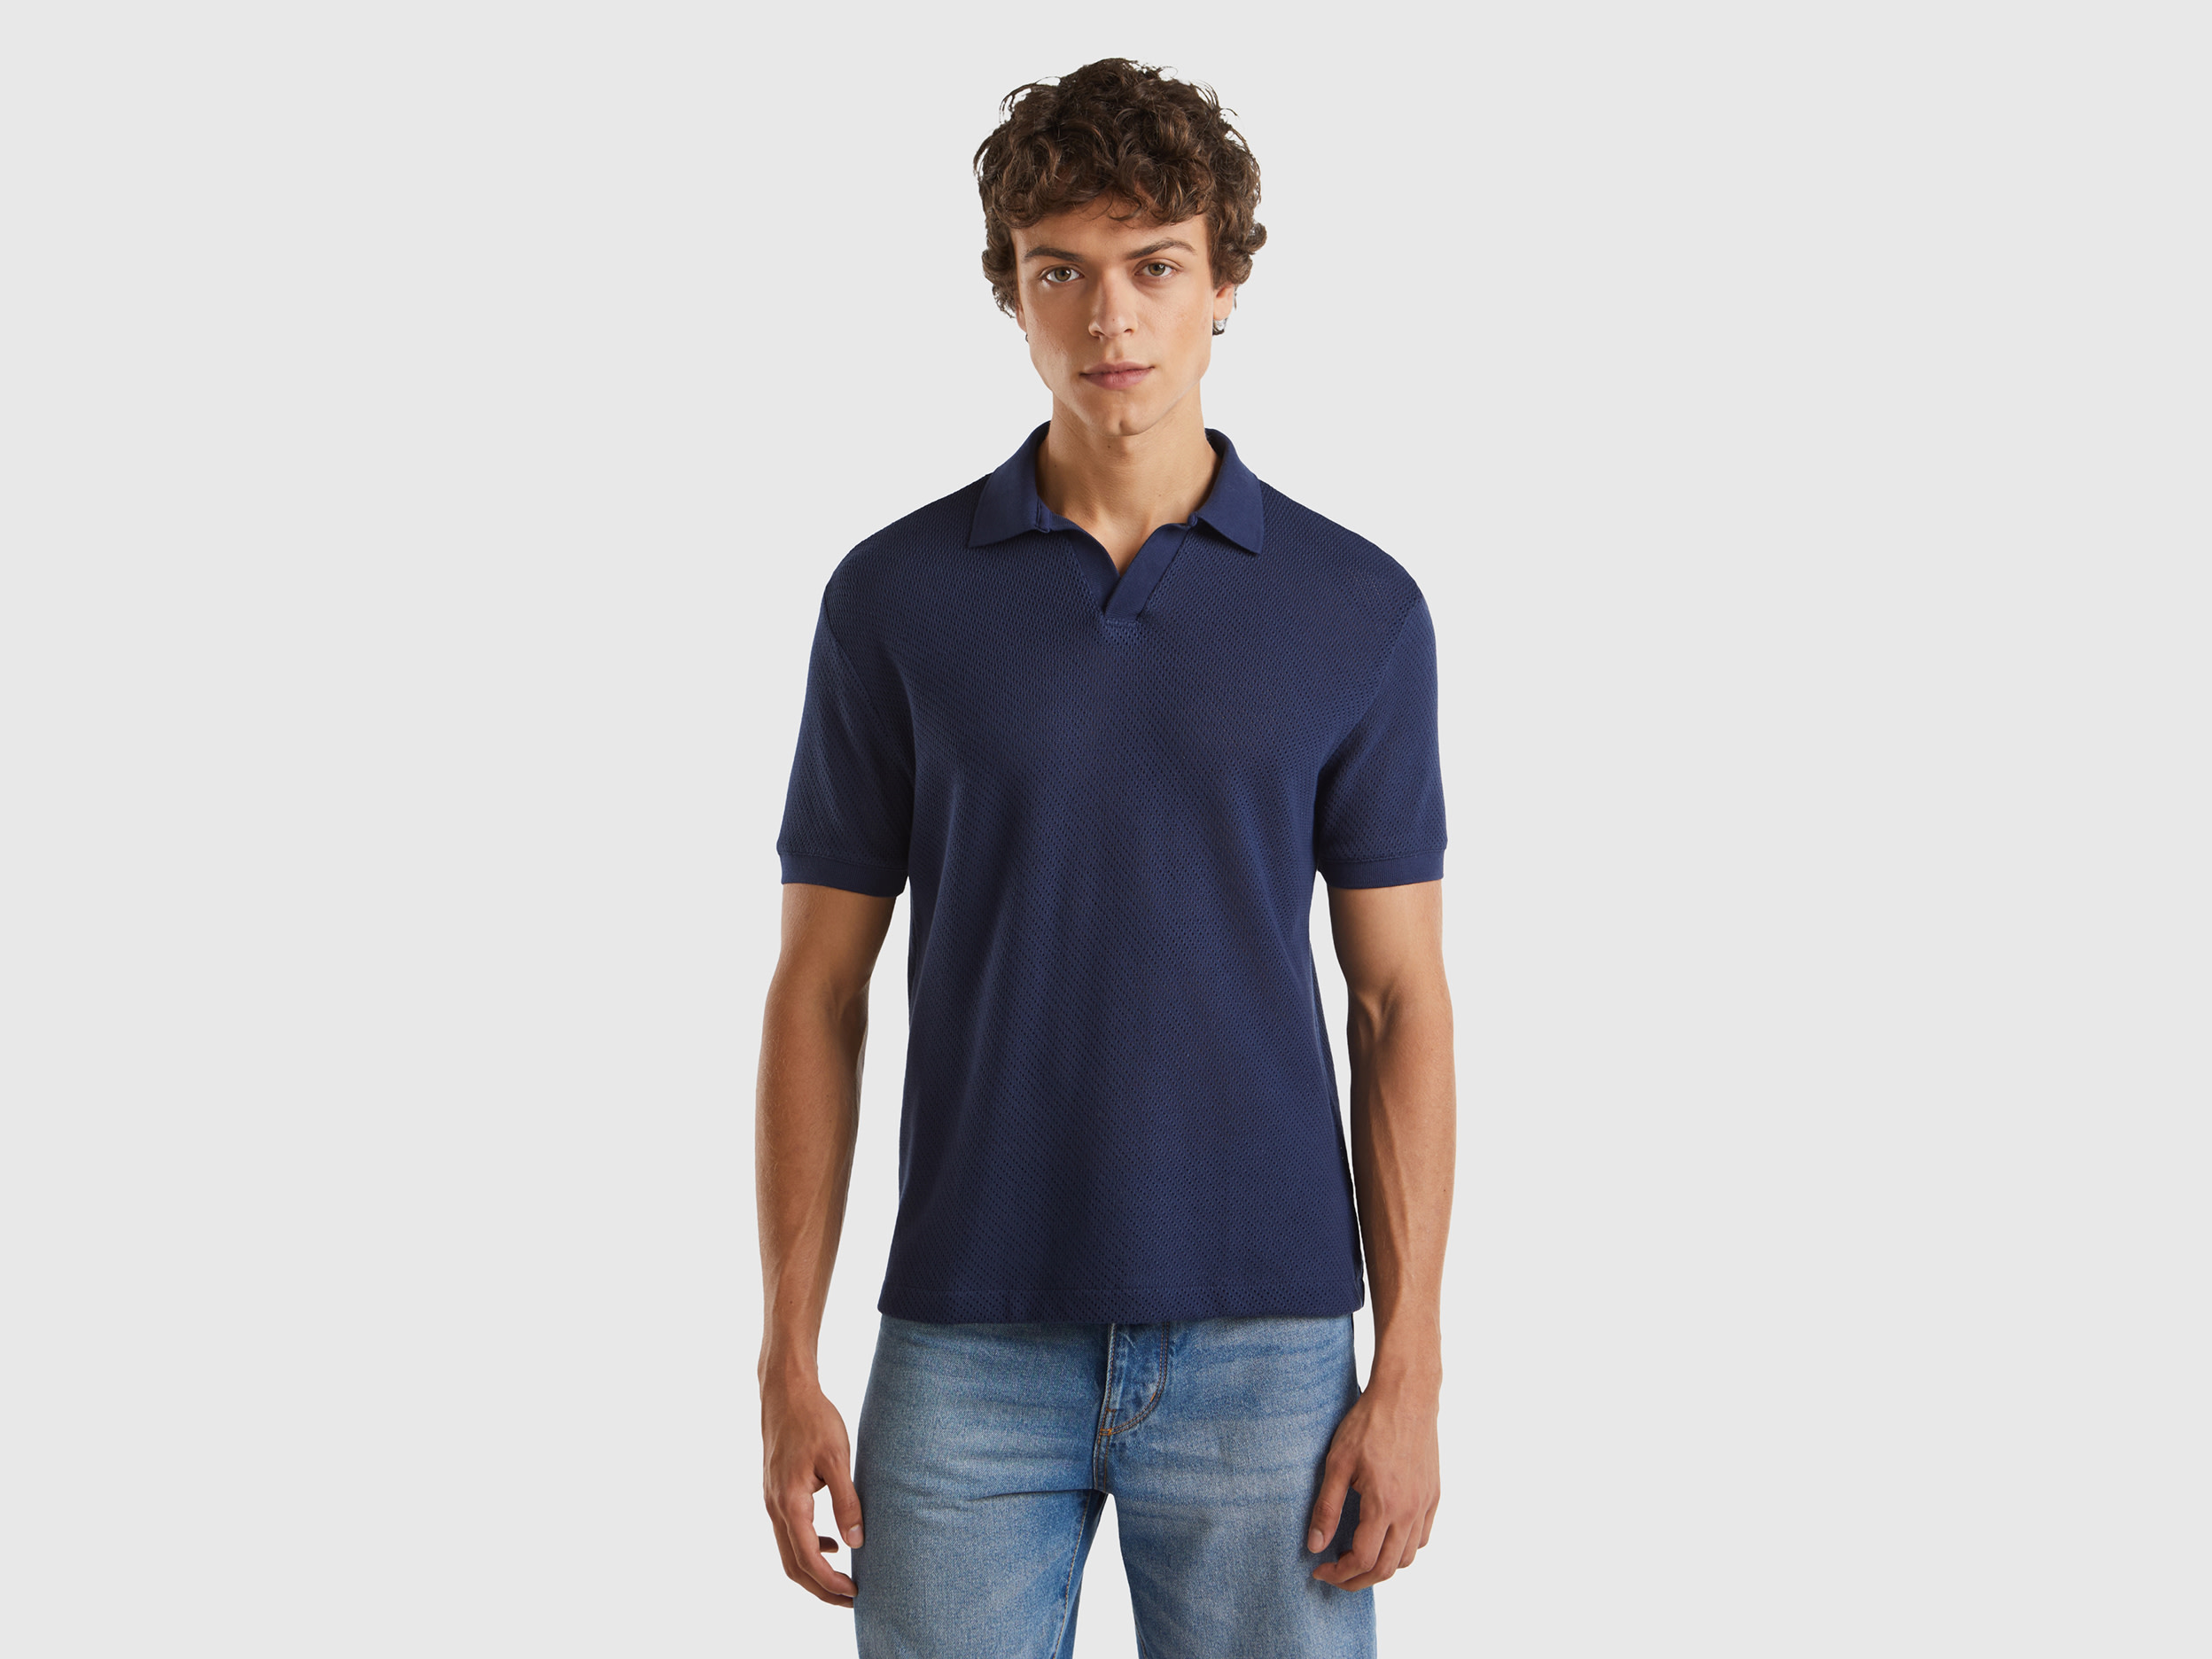 Image of Benetton, Perforated Cotton Polo Shirt, size L, Dark Blue, Men